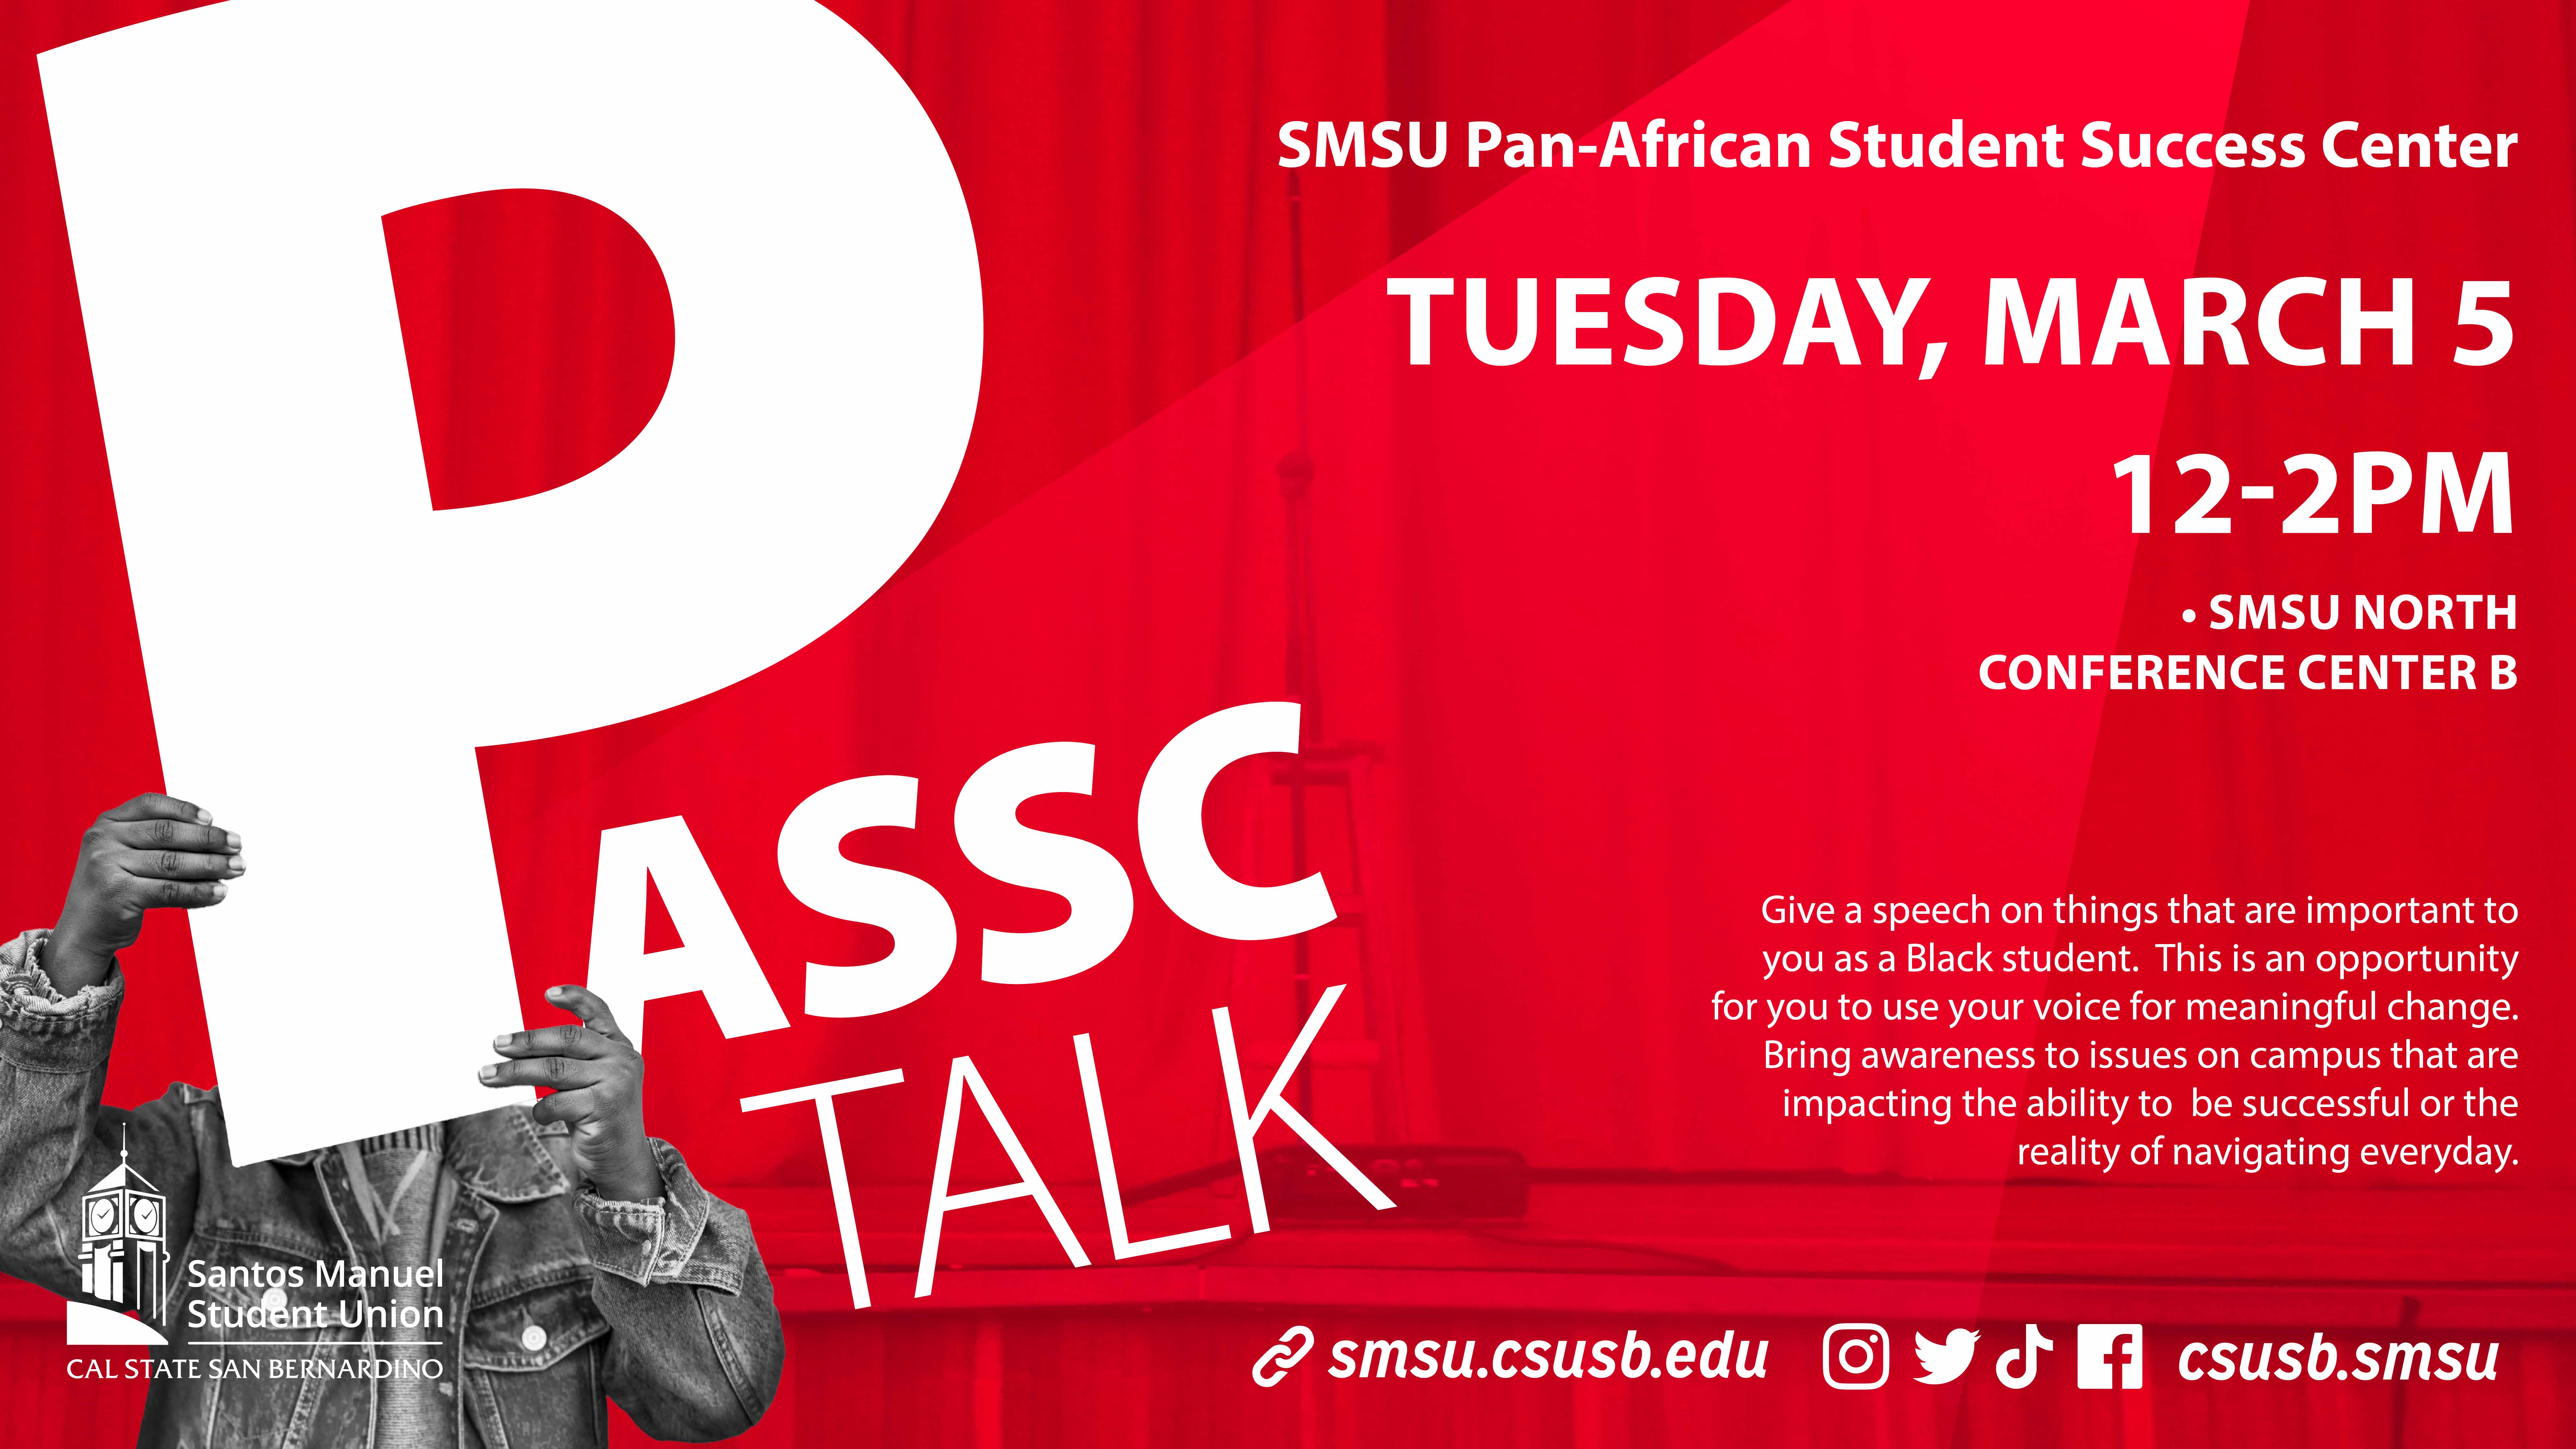 Flyer Reads: PASSC Talk. SMSU Pan-African Student Success Center.  Tuesday, March 5. 12 to 2pm, SMSU North Conference Center B.